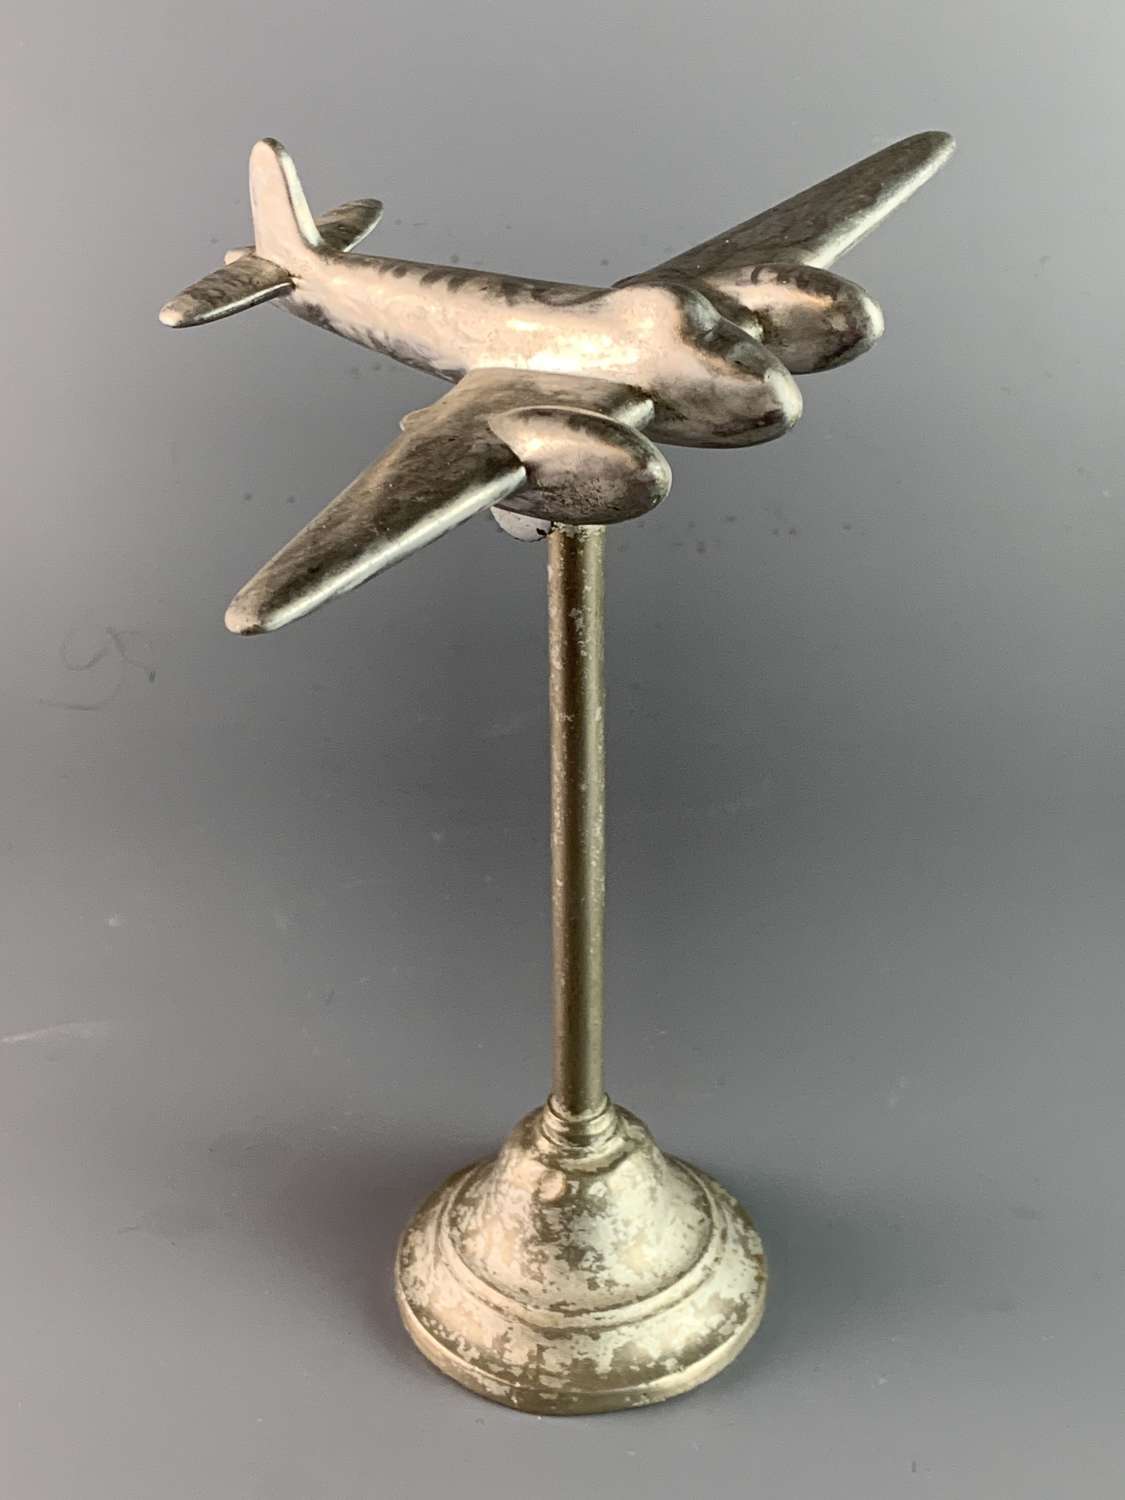 WWII Trench Art Aluminium Model of a Mosquito